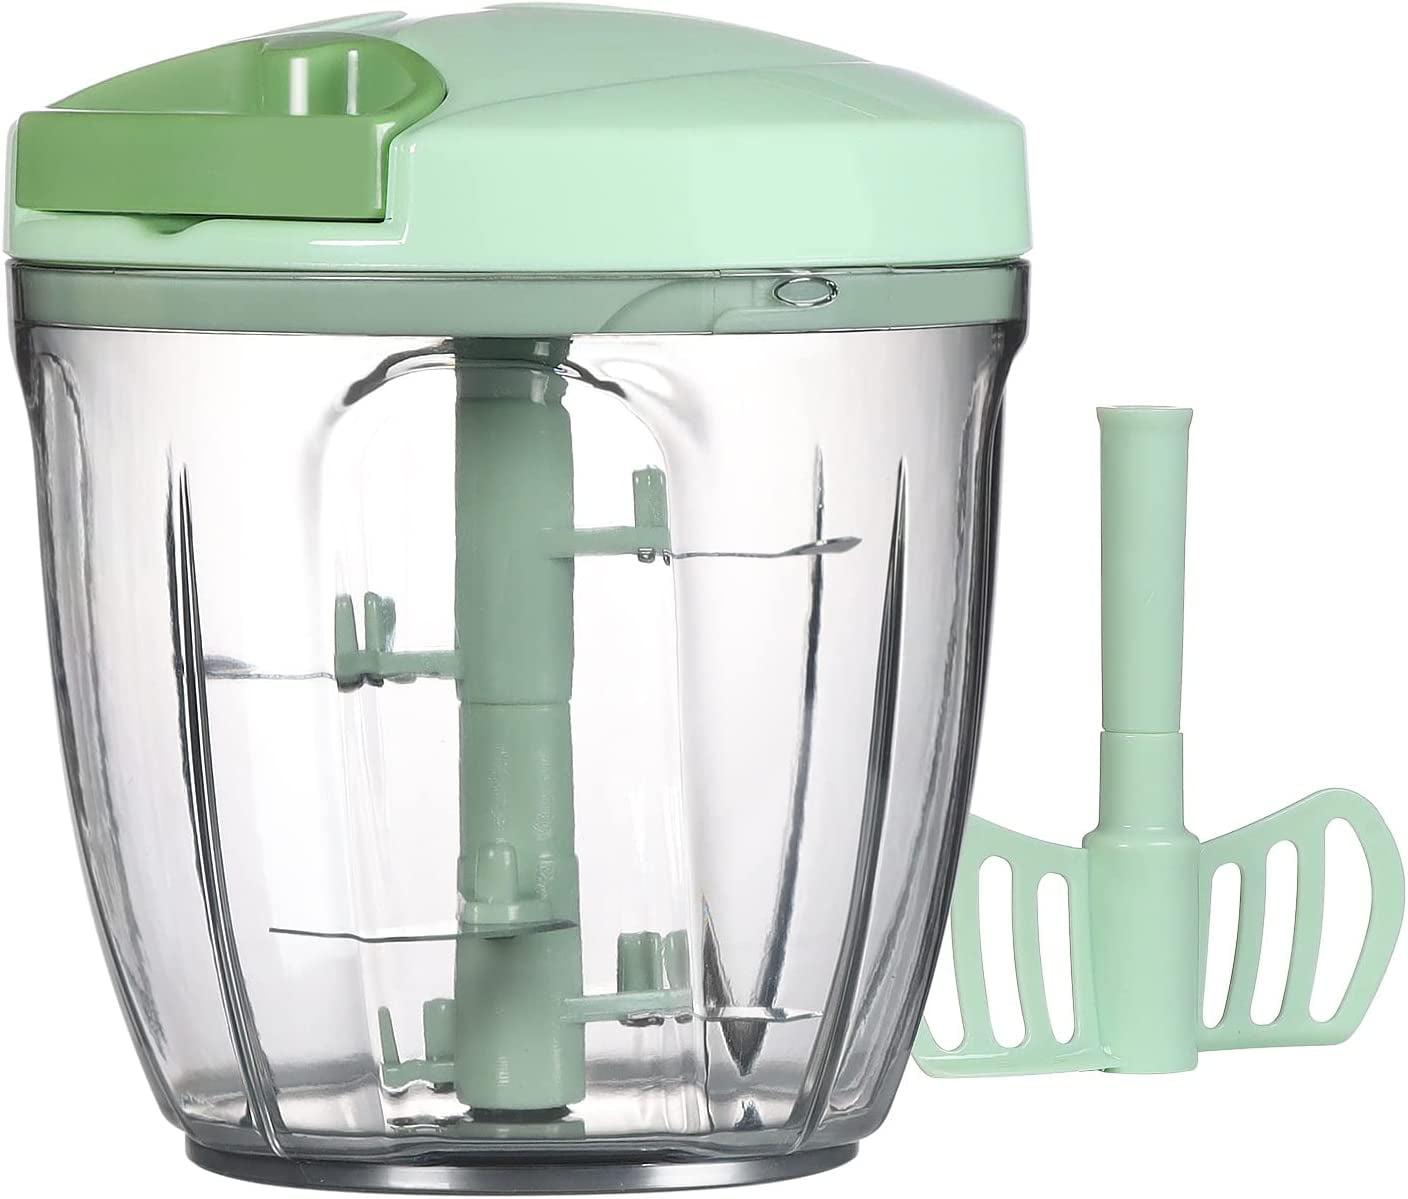 Introducing the UgenixPRO 22-in-1 Vegetable Chopper - the ultimate kit